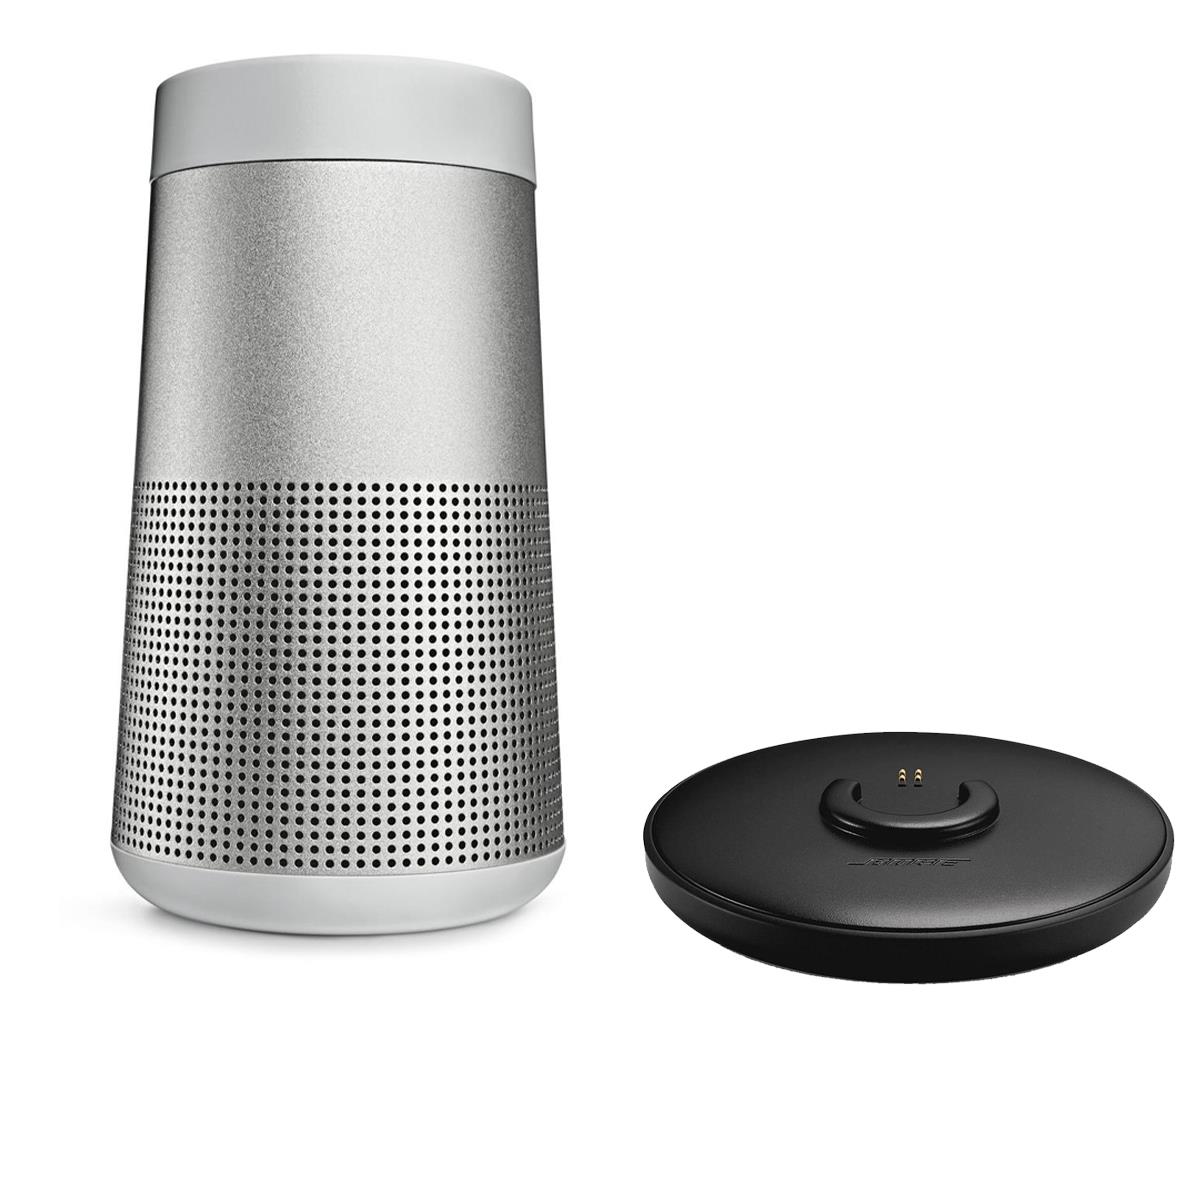 Bose SoundLink Revolve II Bluetooth Speaker, Luxe Gray with Charging Cradle -  858365-0300 K